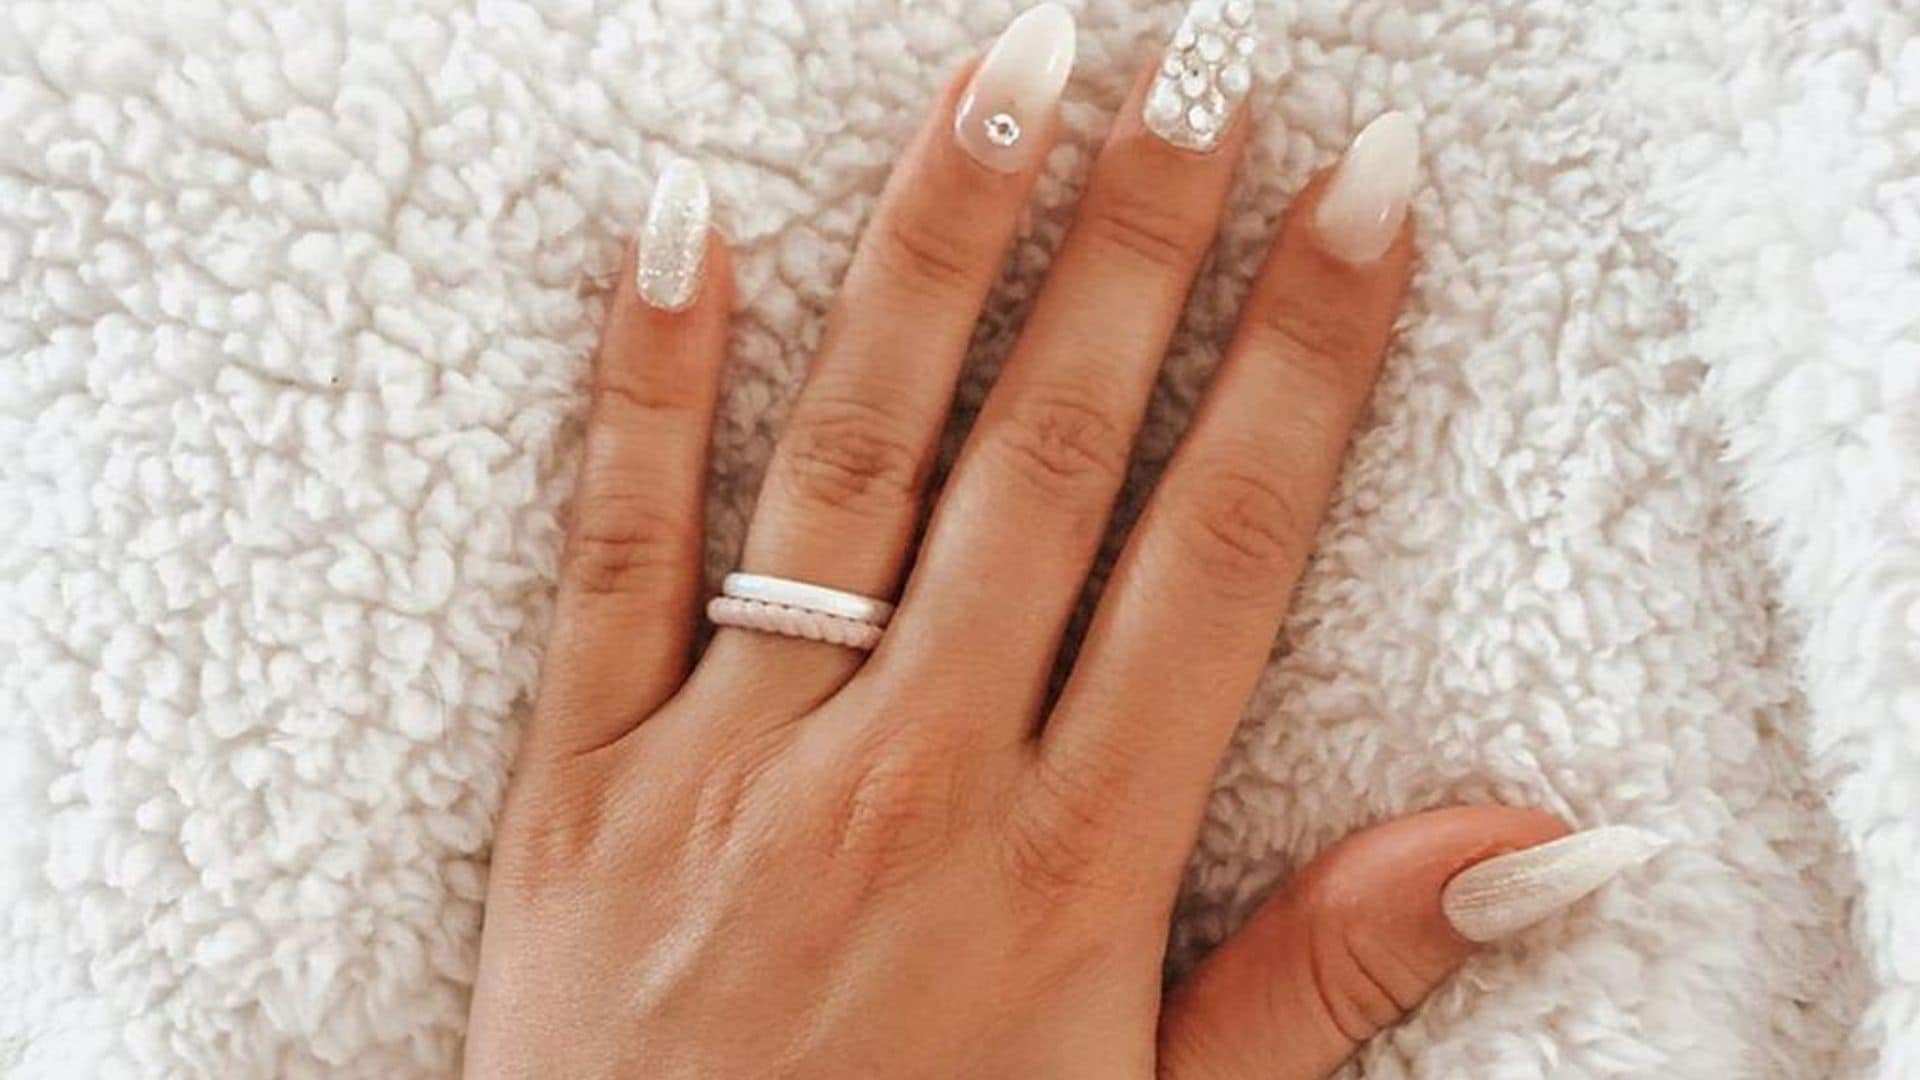 Press-on nails that’ll have you feeling like you just left the salon